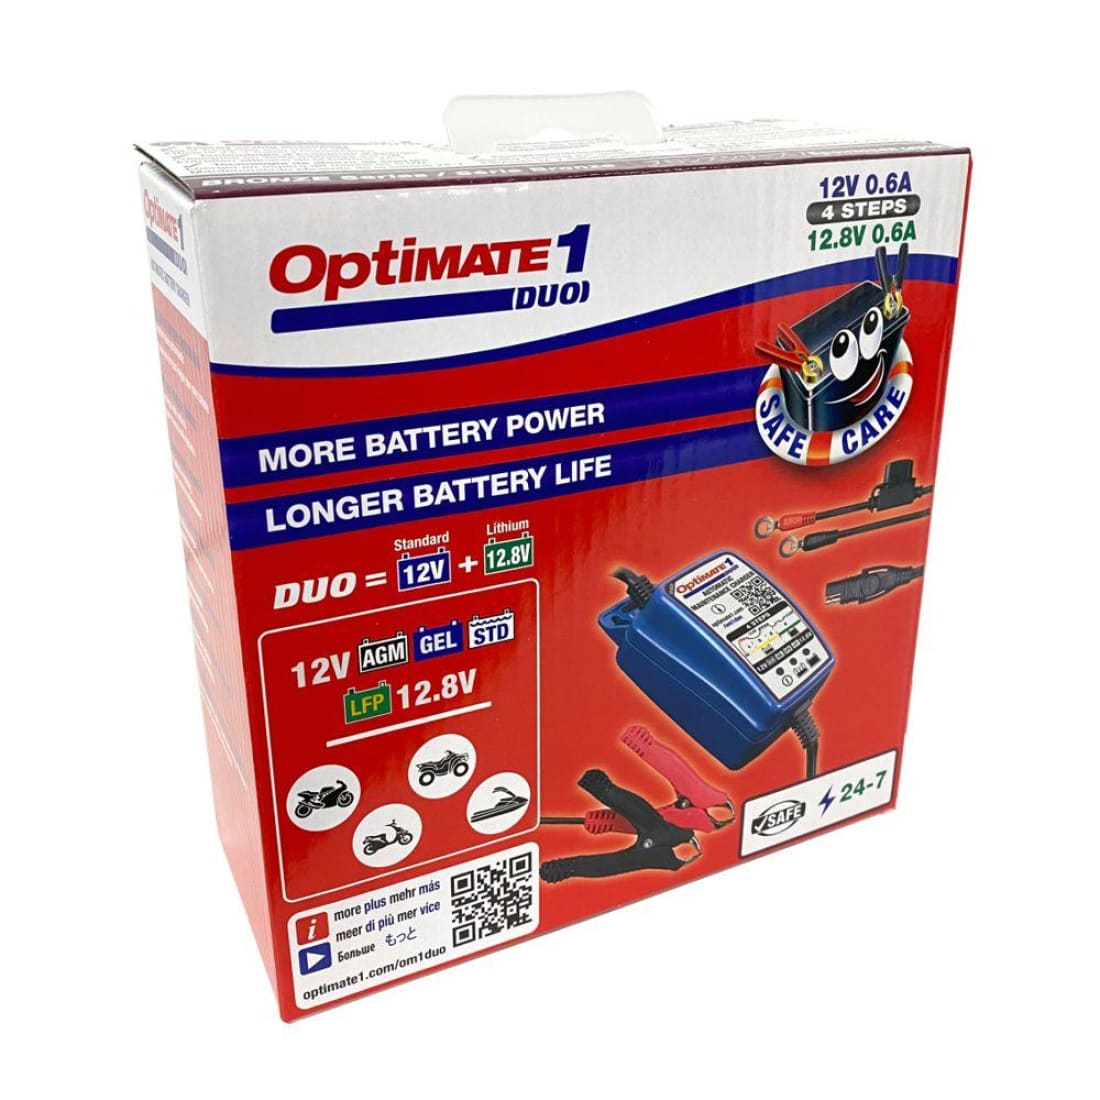 optimate 1 duo battery charger